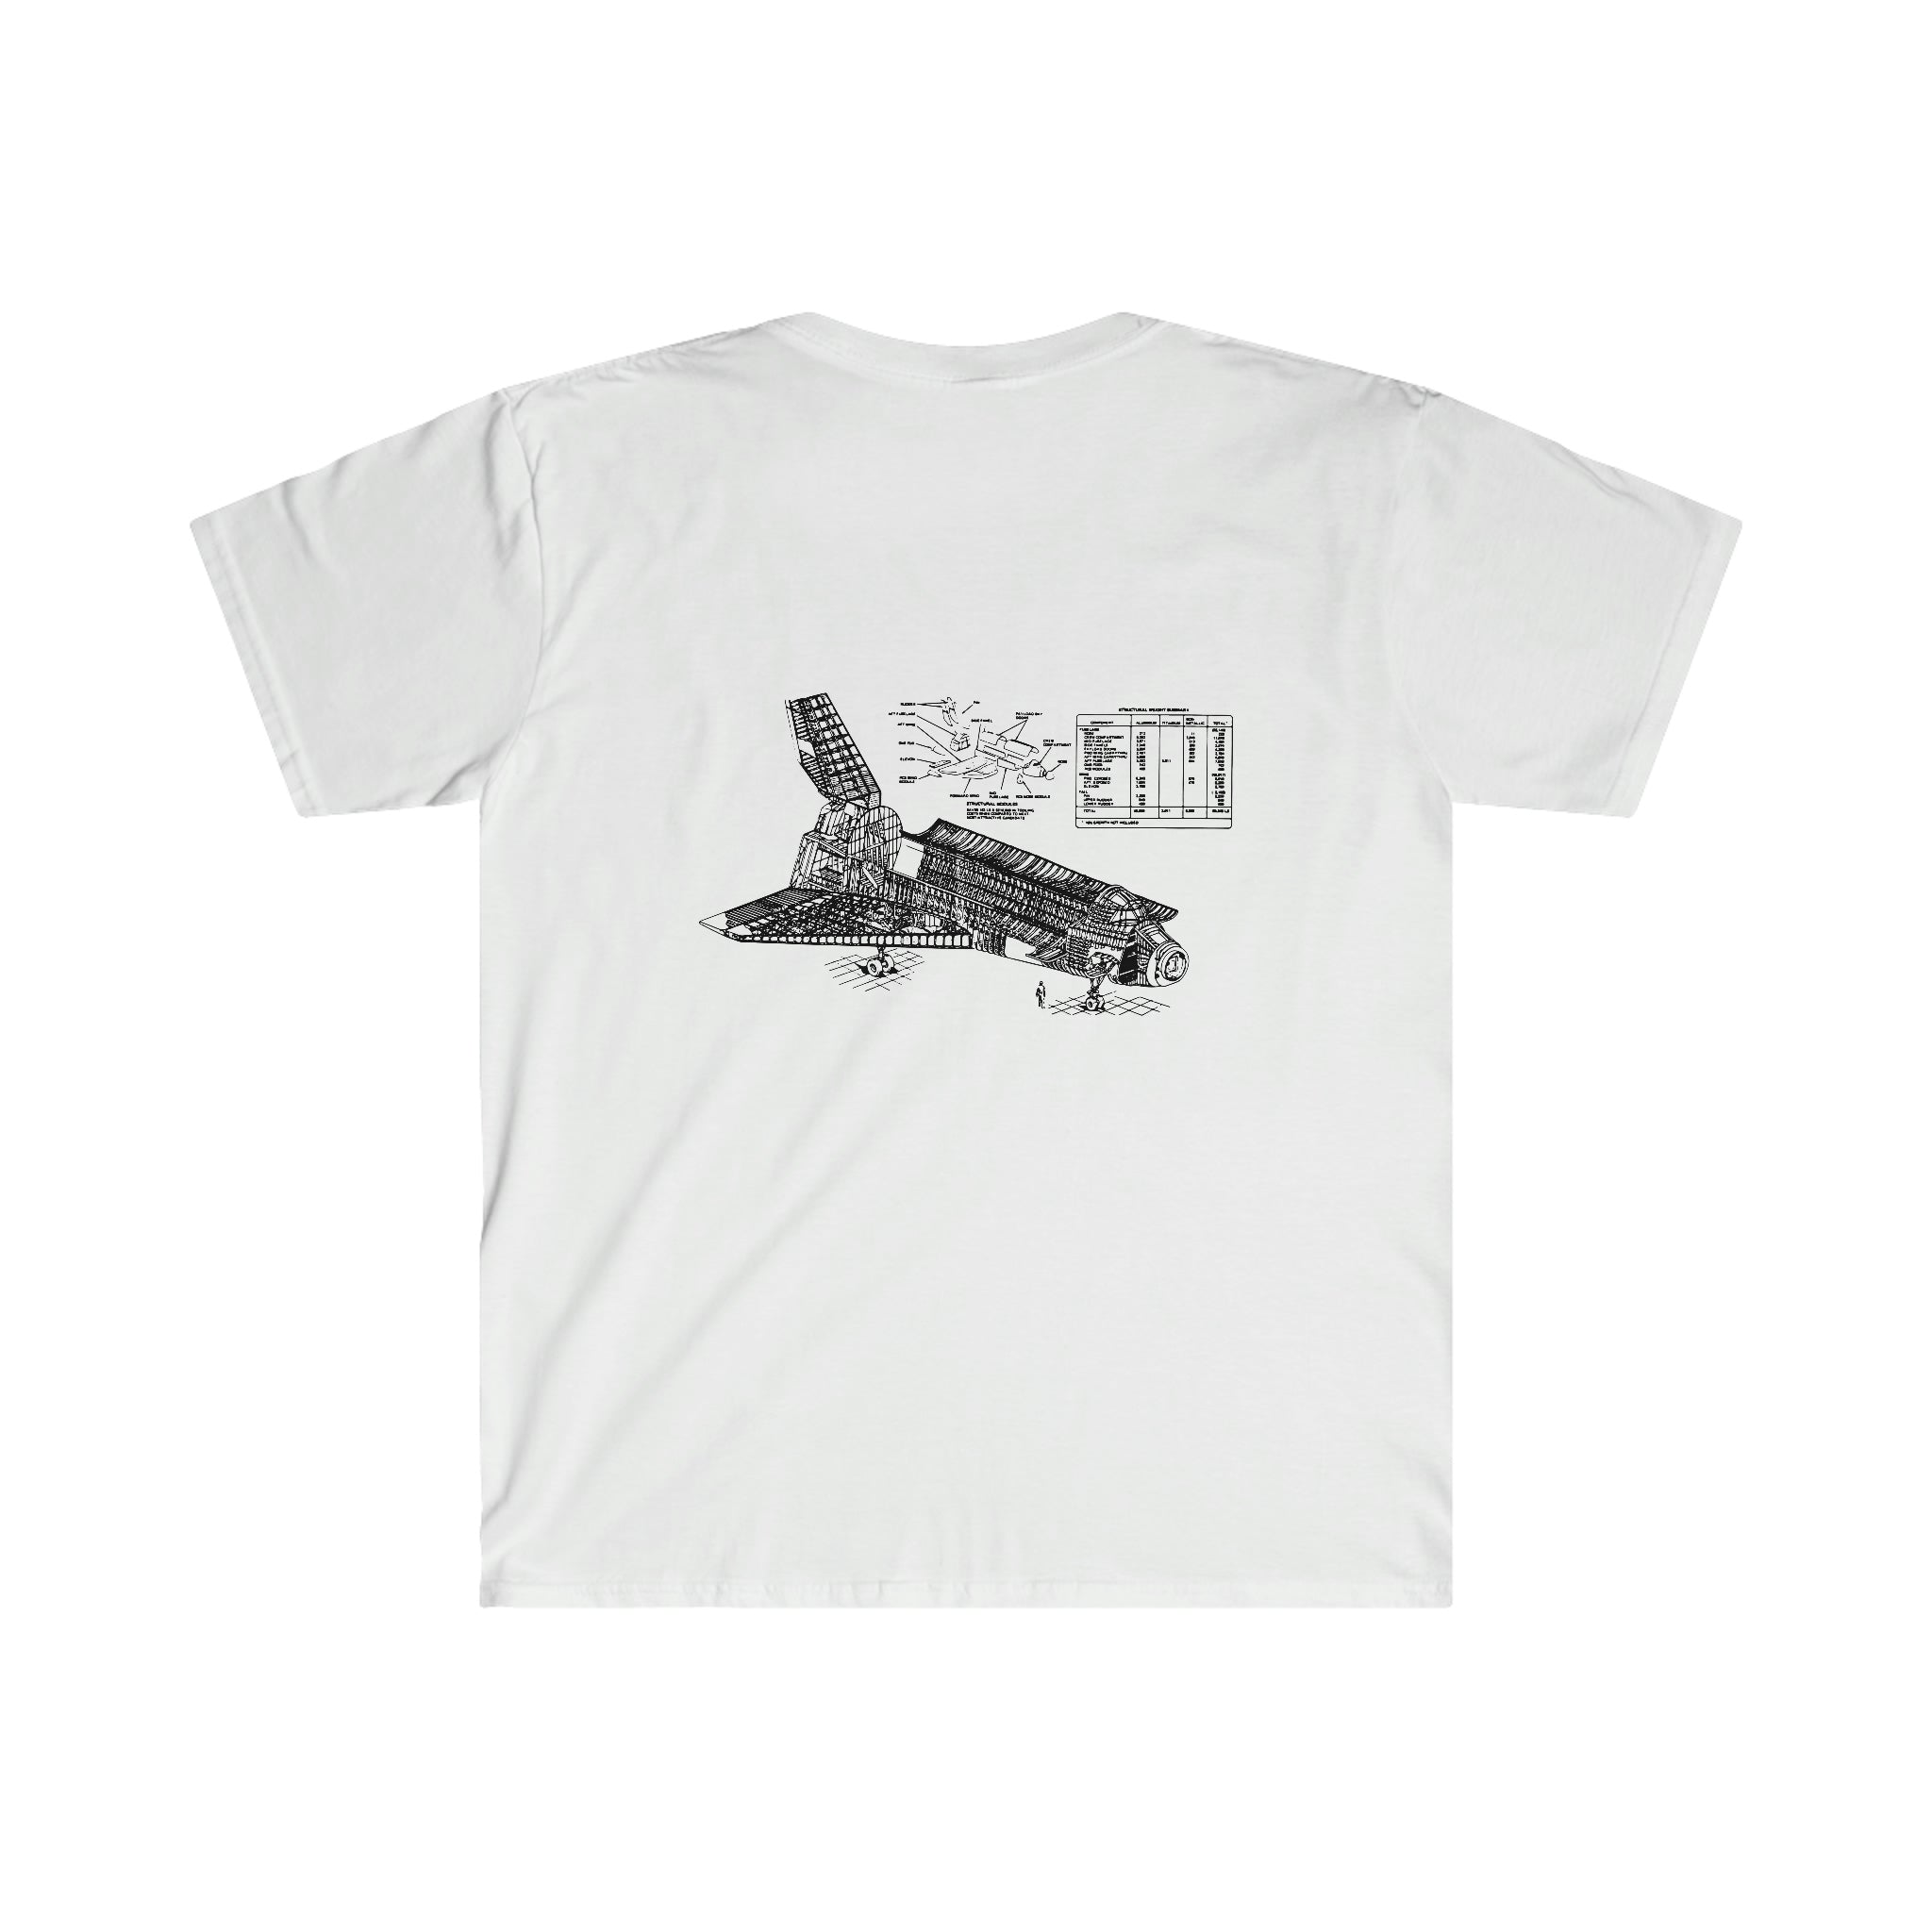 A Space is my goal T-Shirt, perfect for adding style to your wardrobe, featuring a drawing of a plane on it.